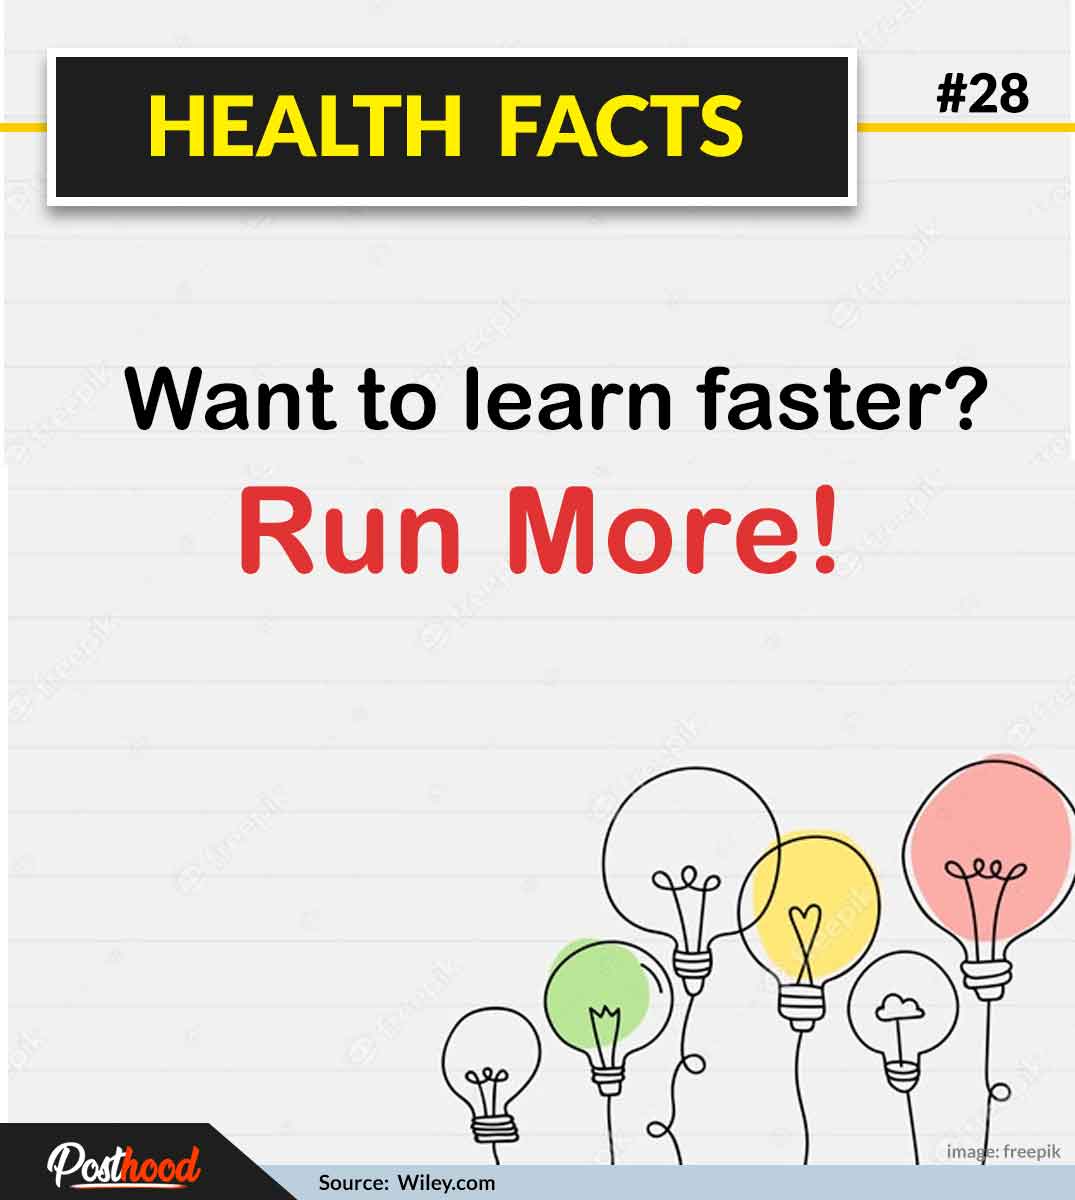 How do you boost your brain power? Science says that running helps you a lot in learning and boosting creativity. Know more other interesting health and fitness facts.